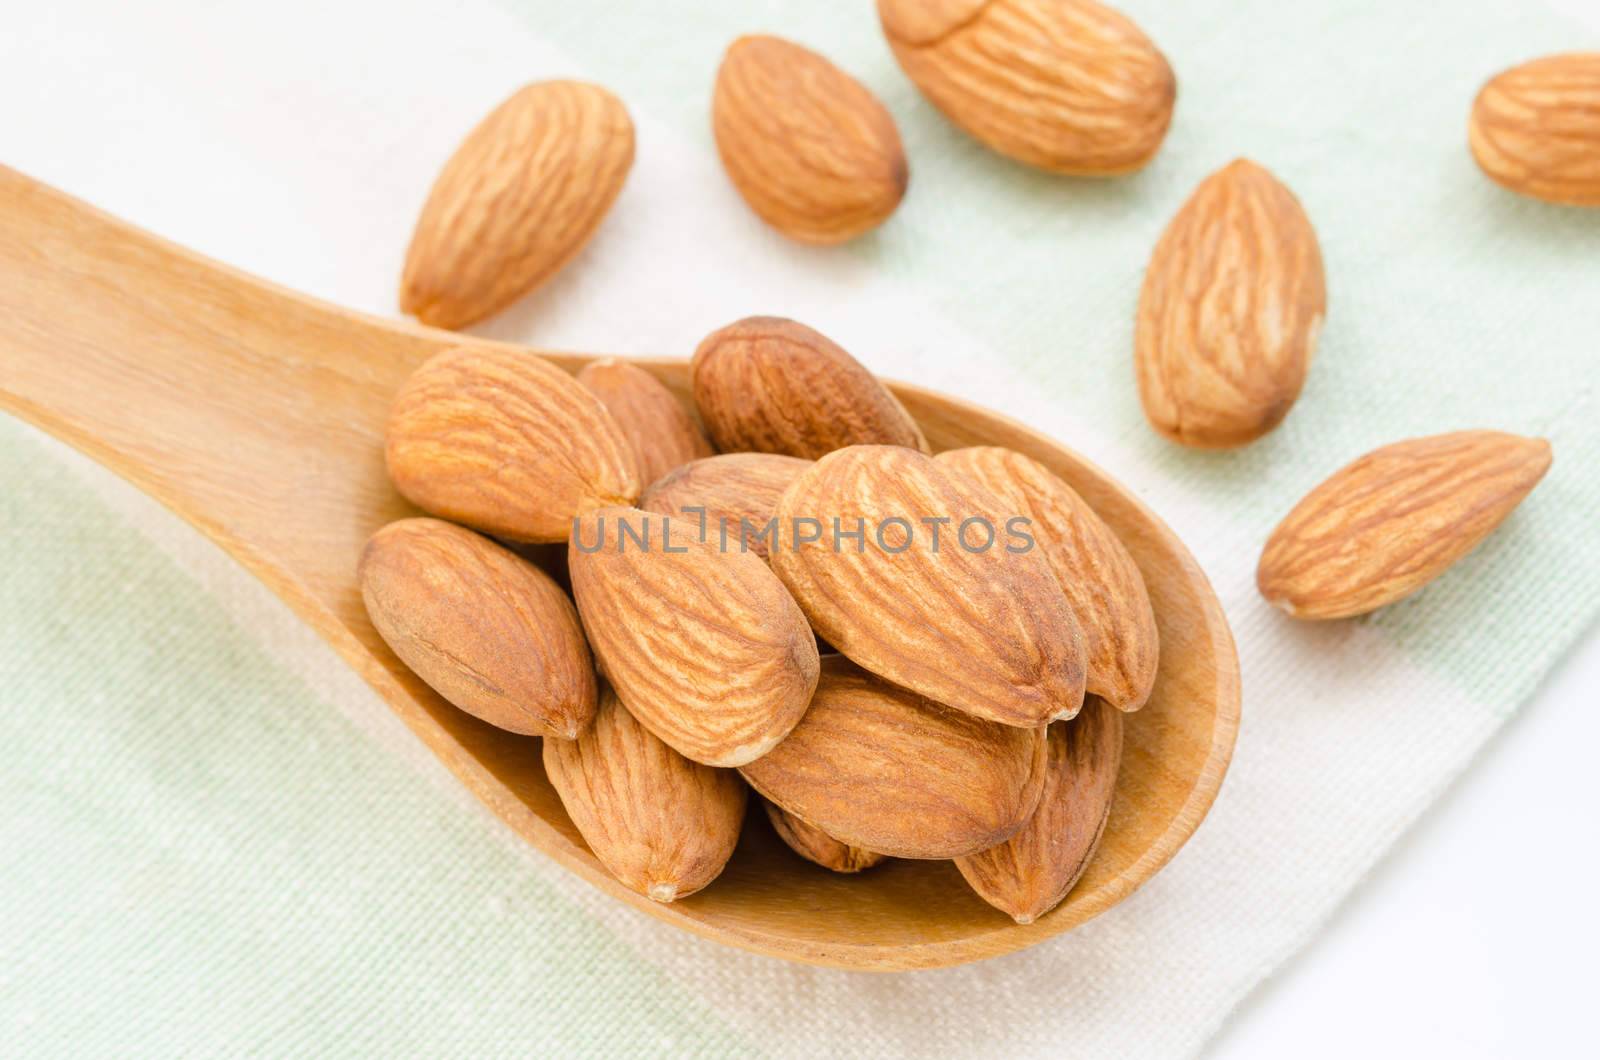 Raw Almond in wood spoon on tablecloth.